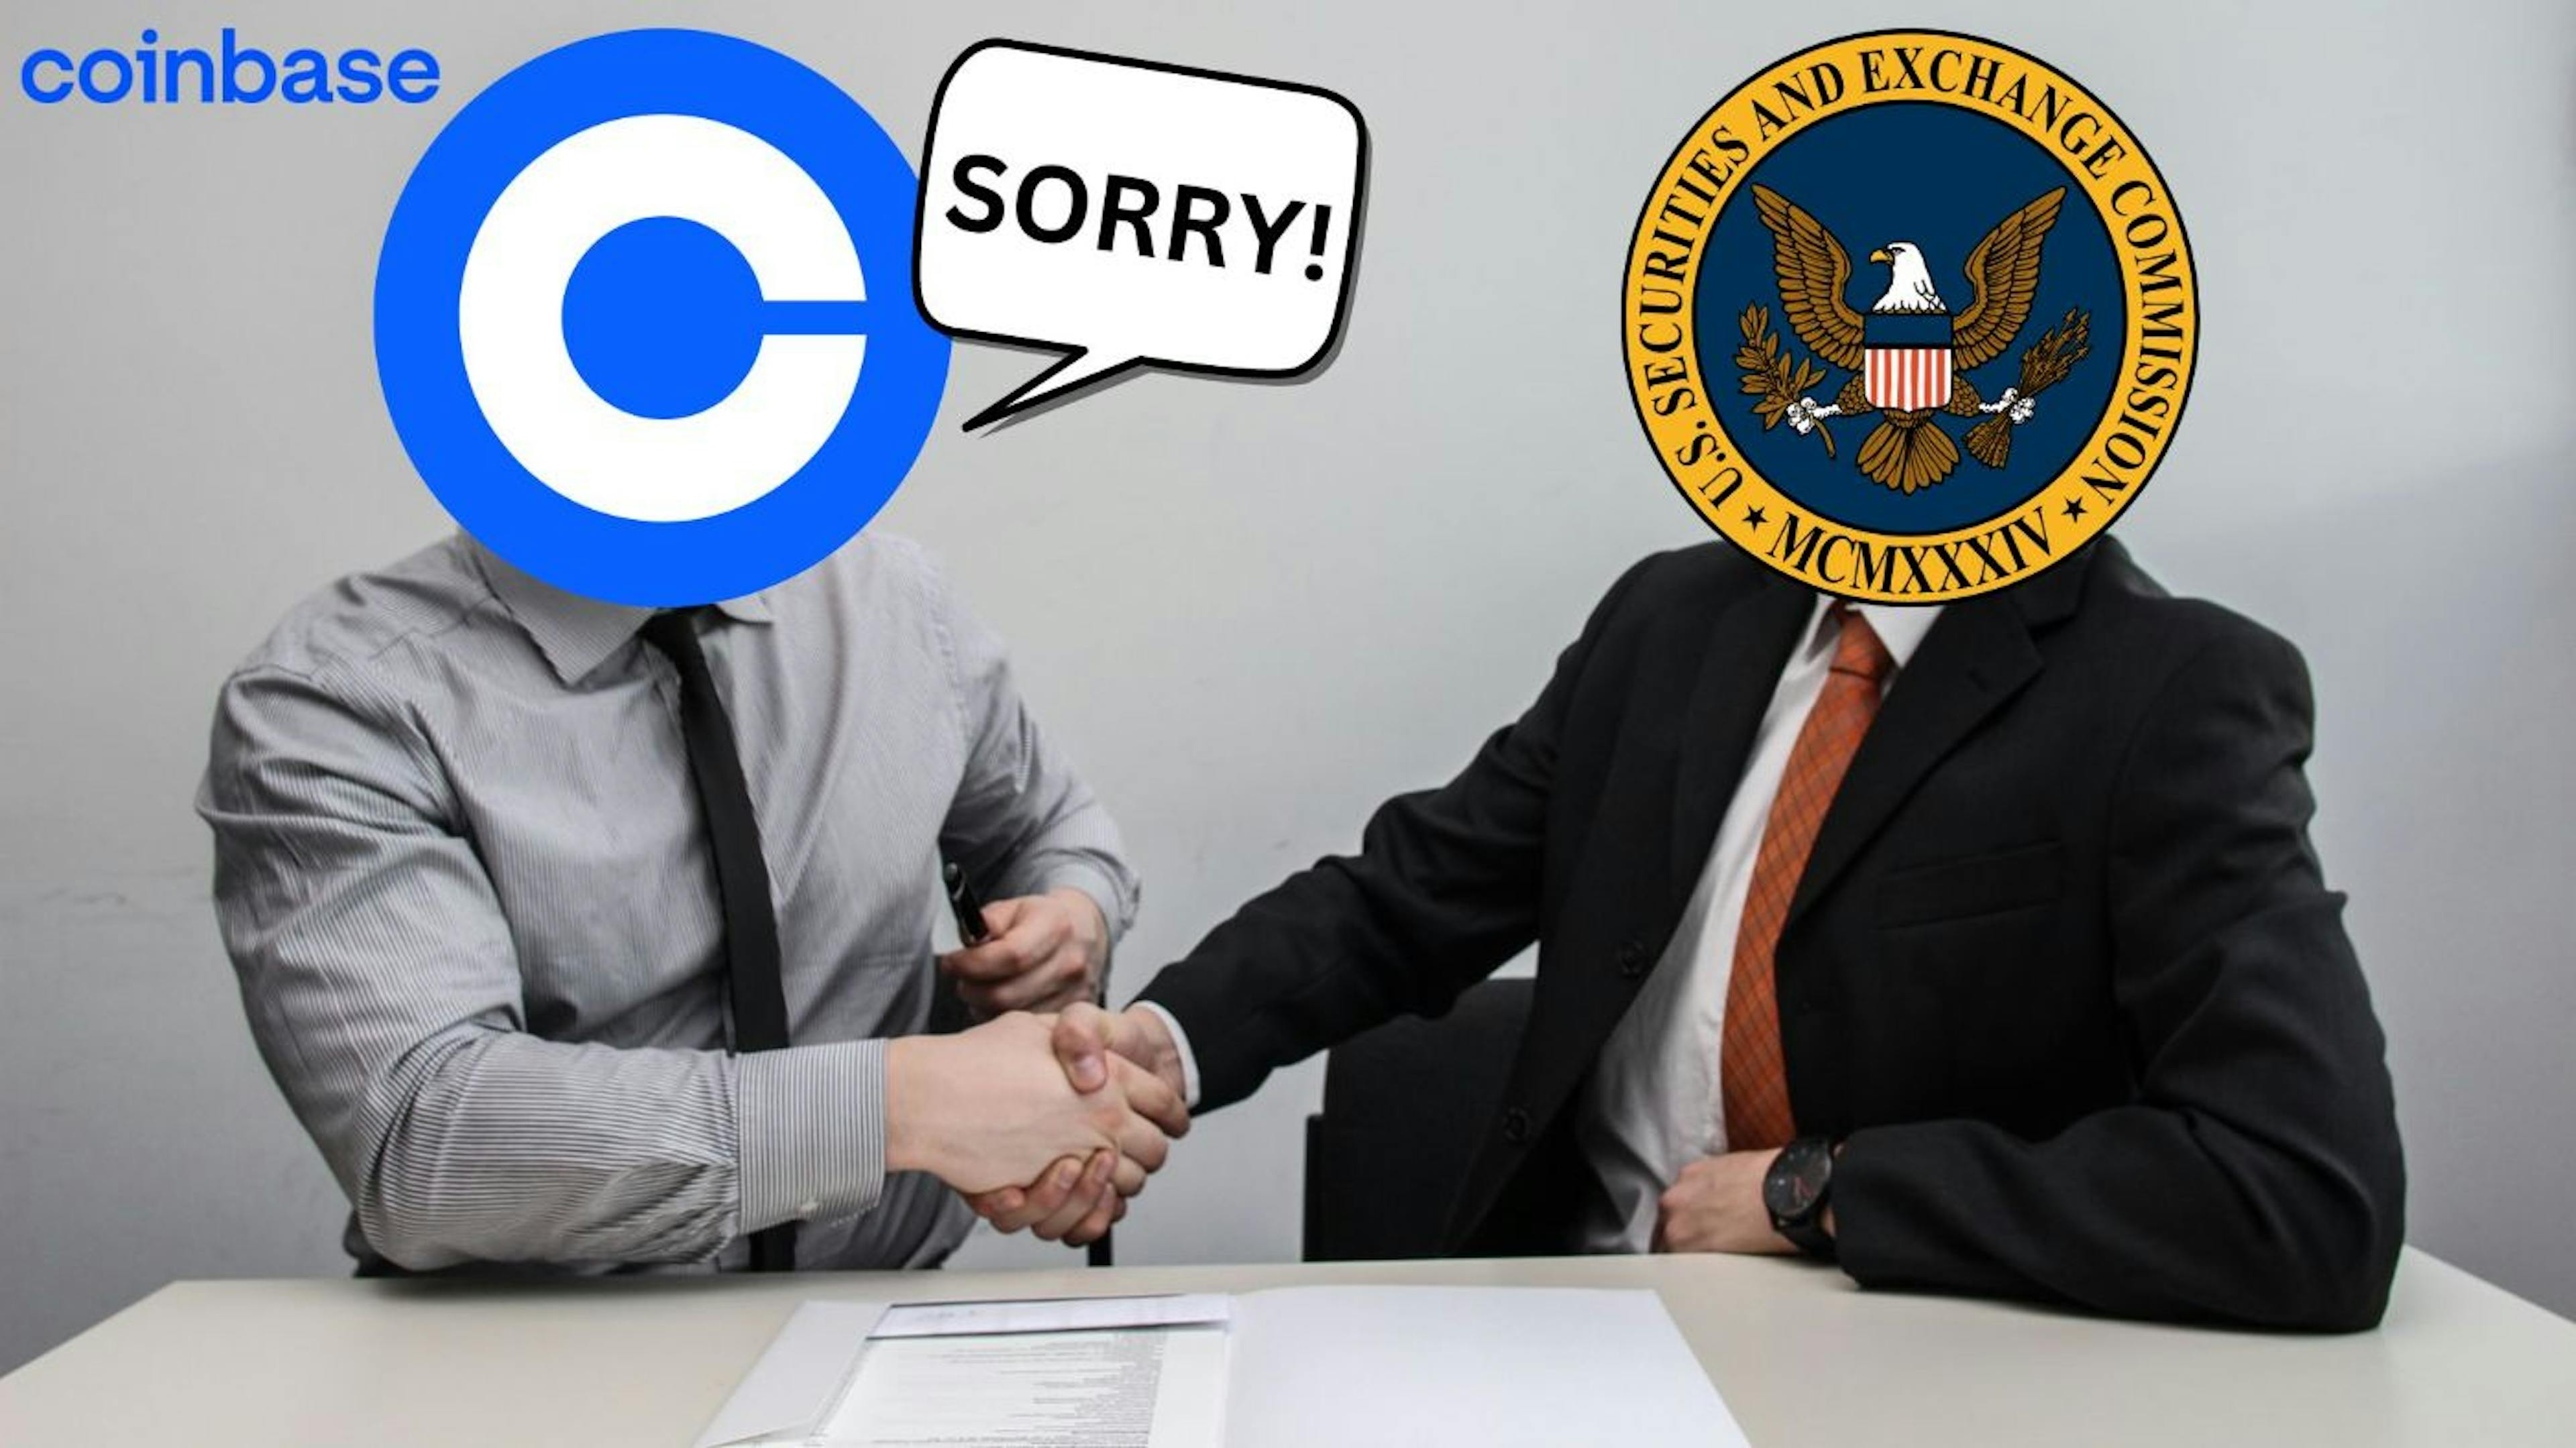 /heres-whats-happening-with-the-former-coinbase-manager-and-the-sec feature image